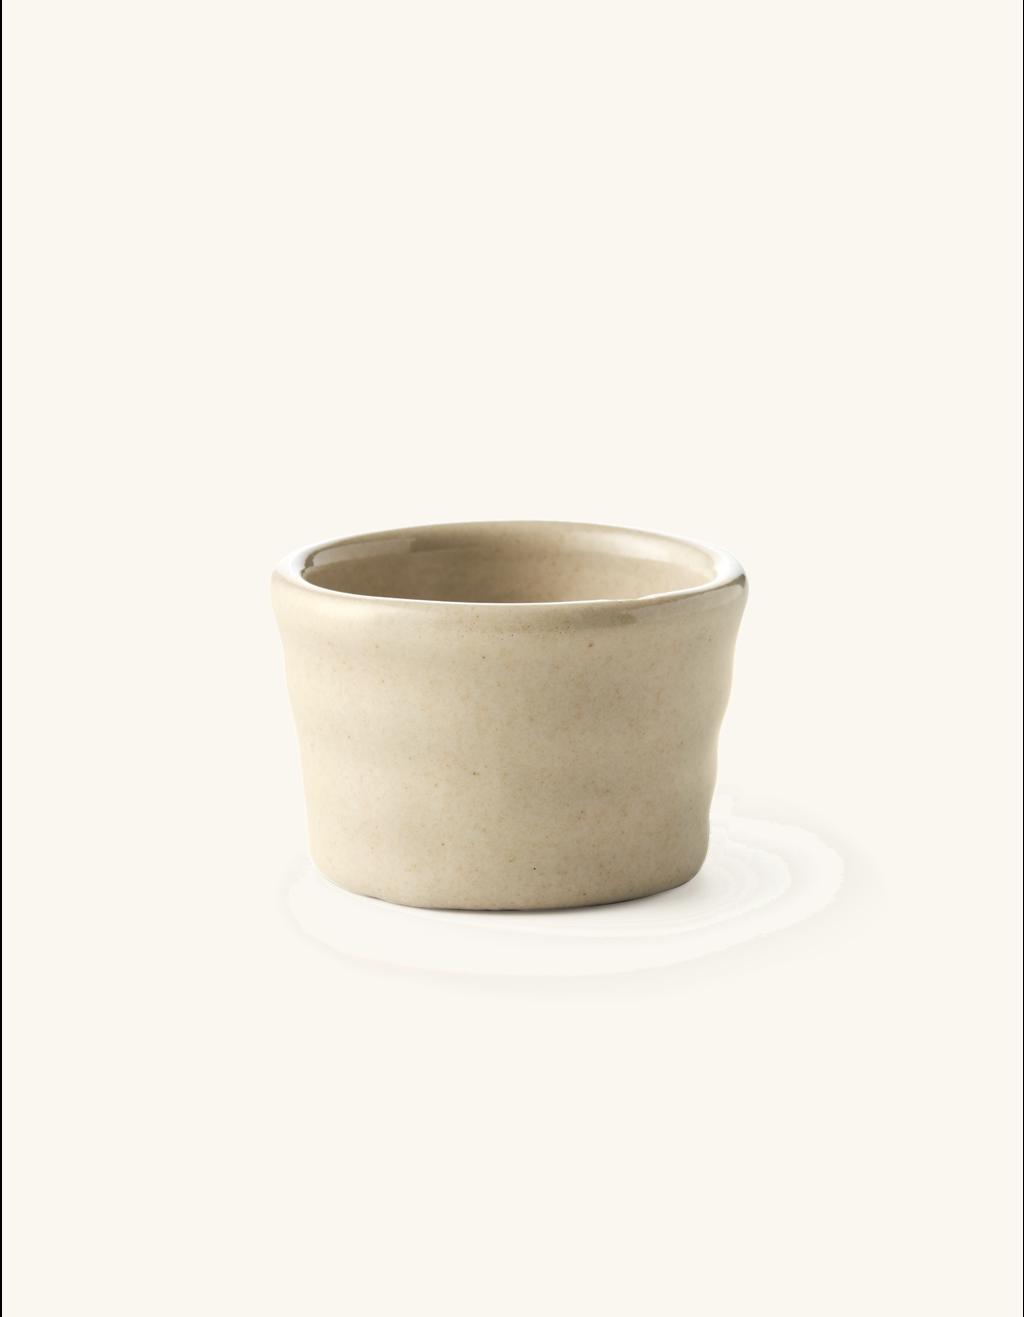 Home - Egg cup - Stoneware. 5 x 3.5 cm.